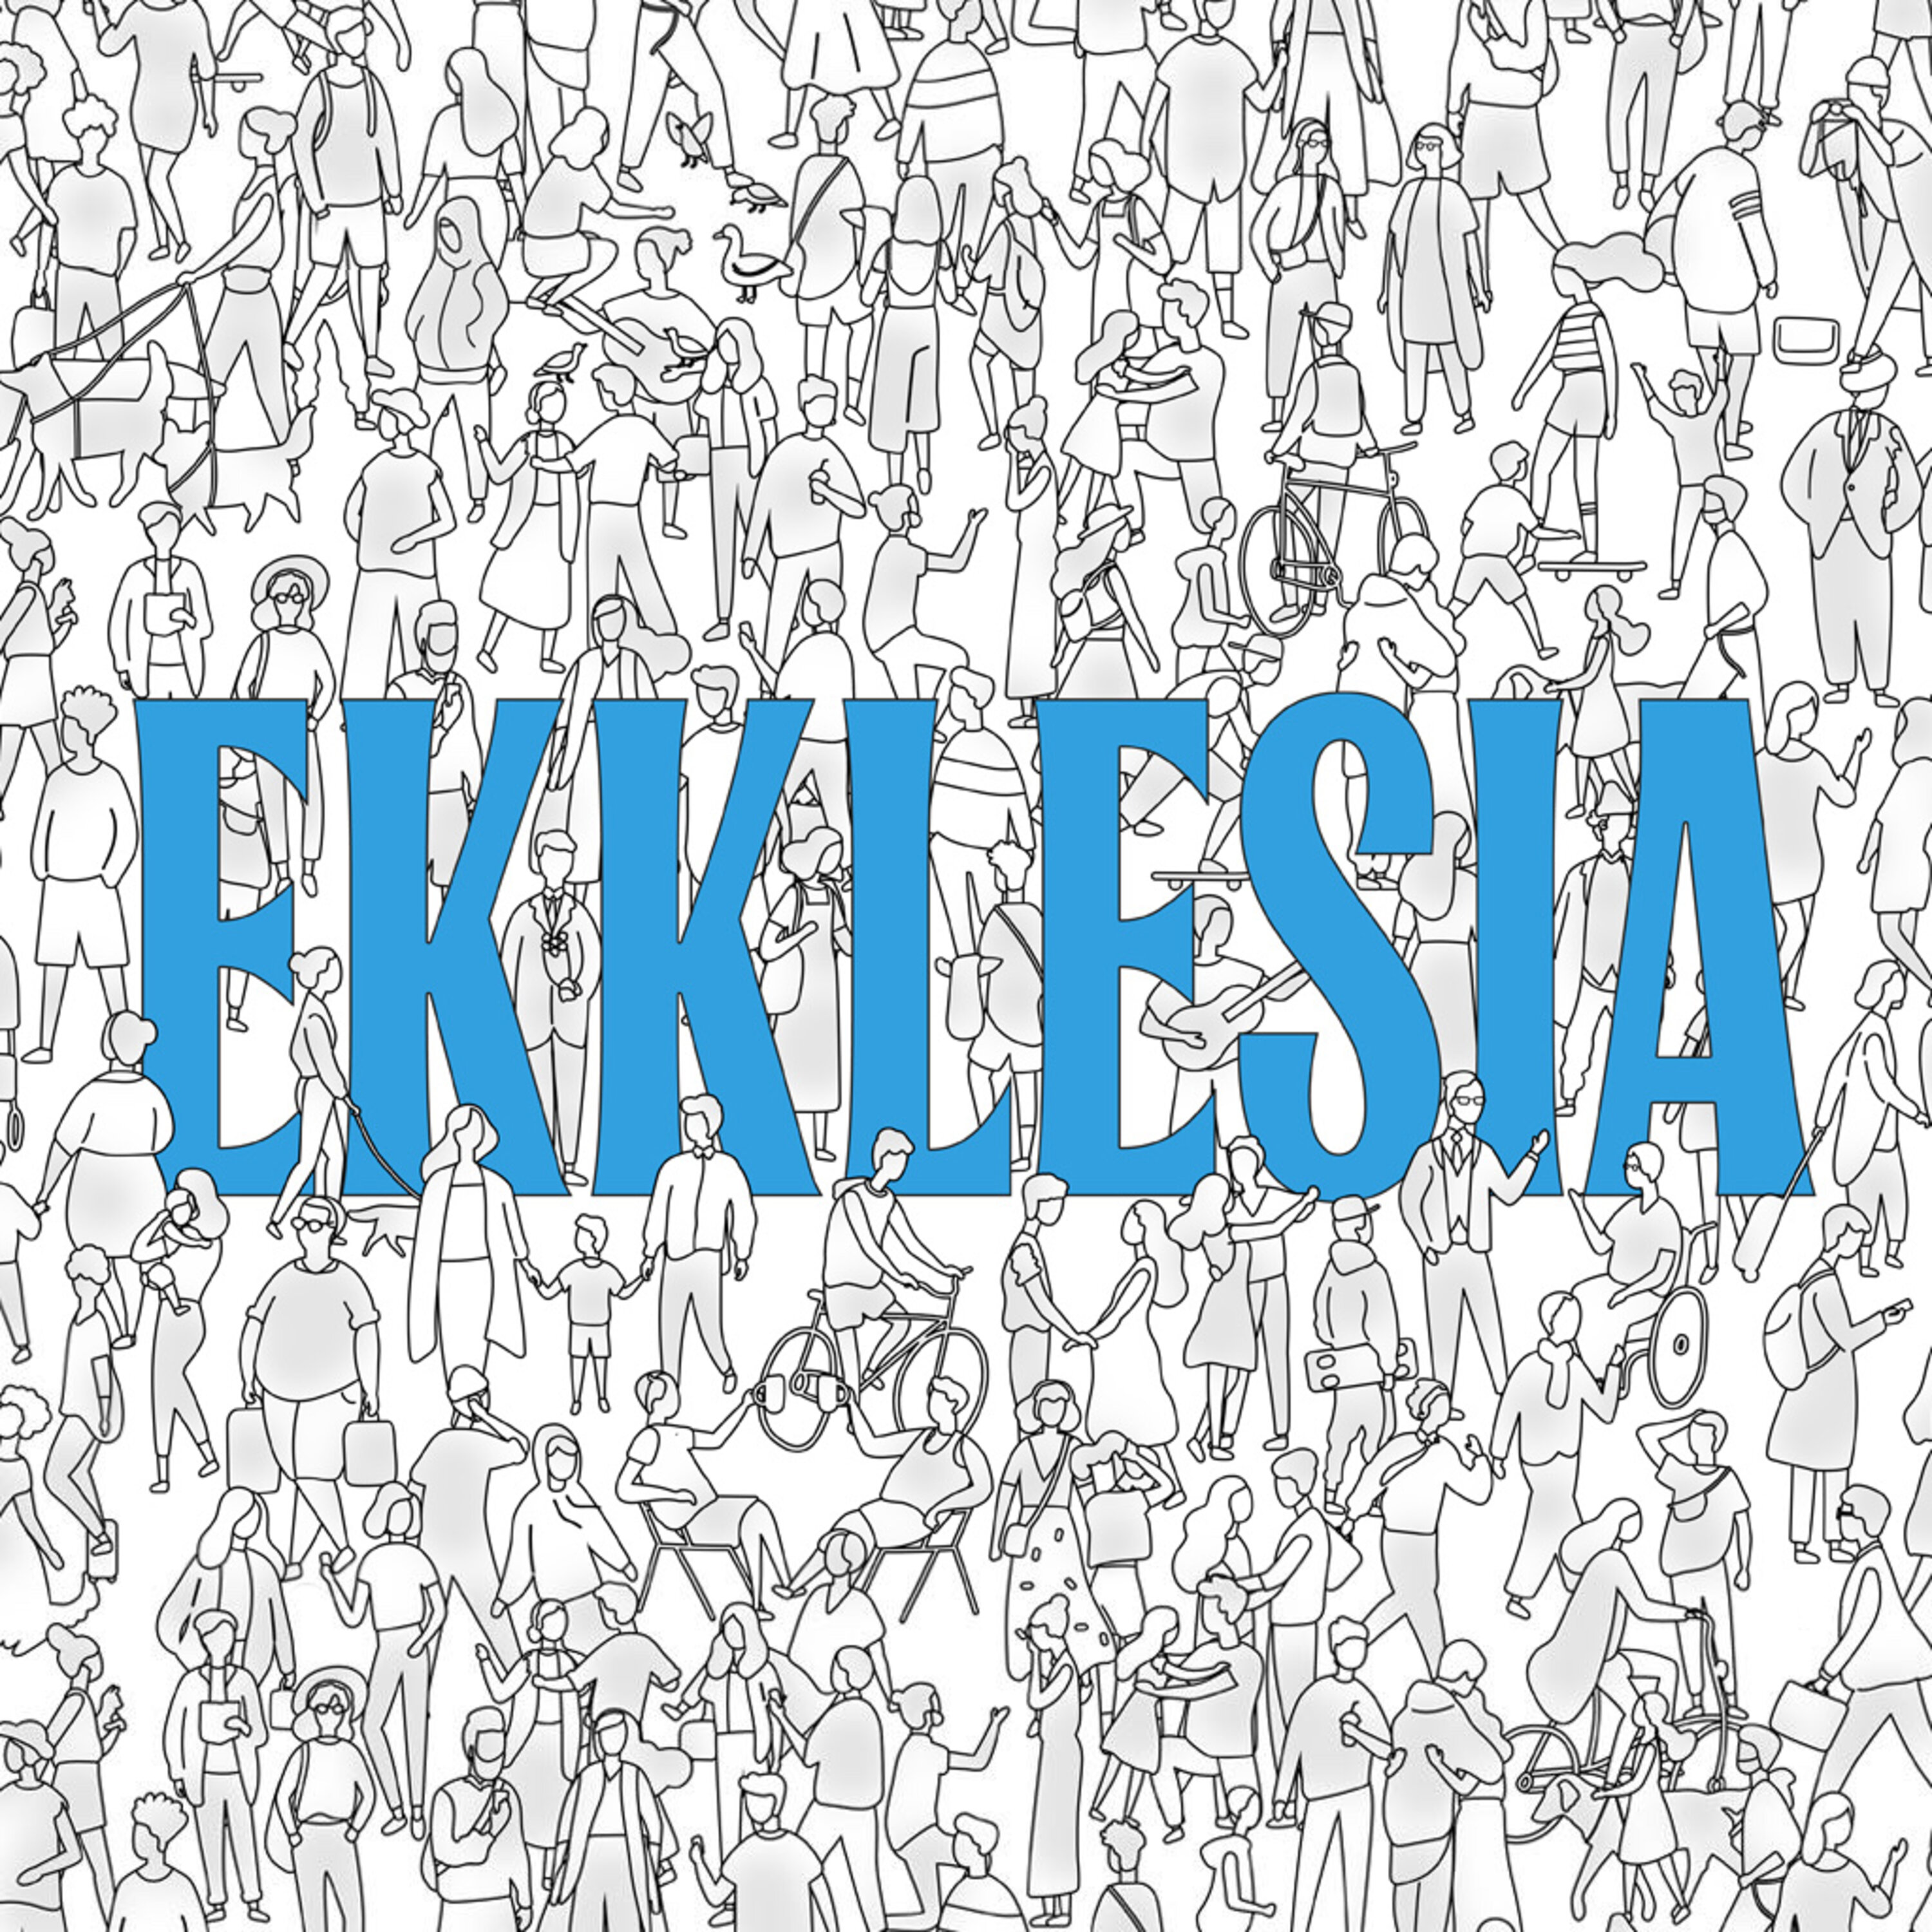 Ekklesia, Part 5: The Wonder of It All // Andy Stanley